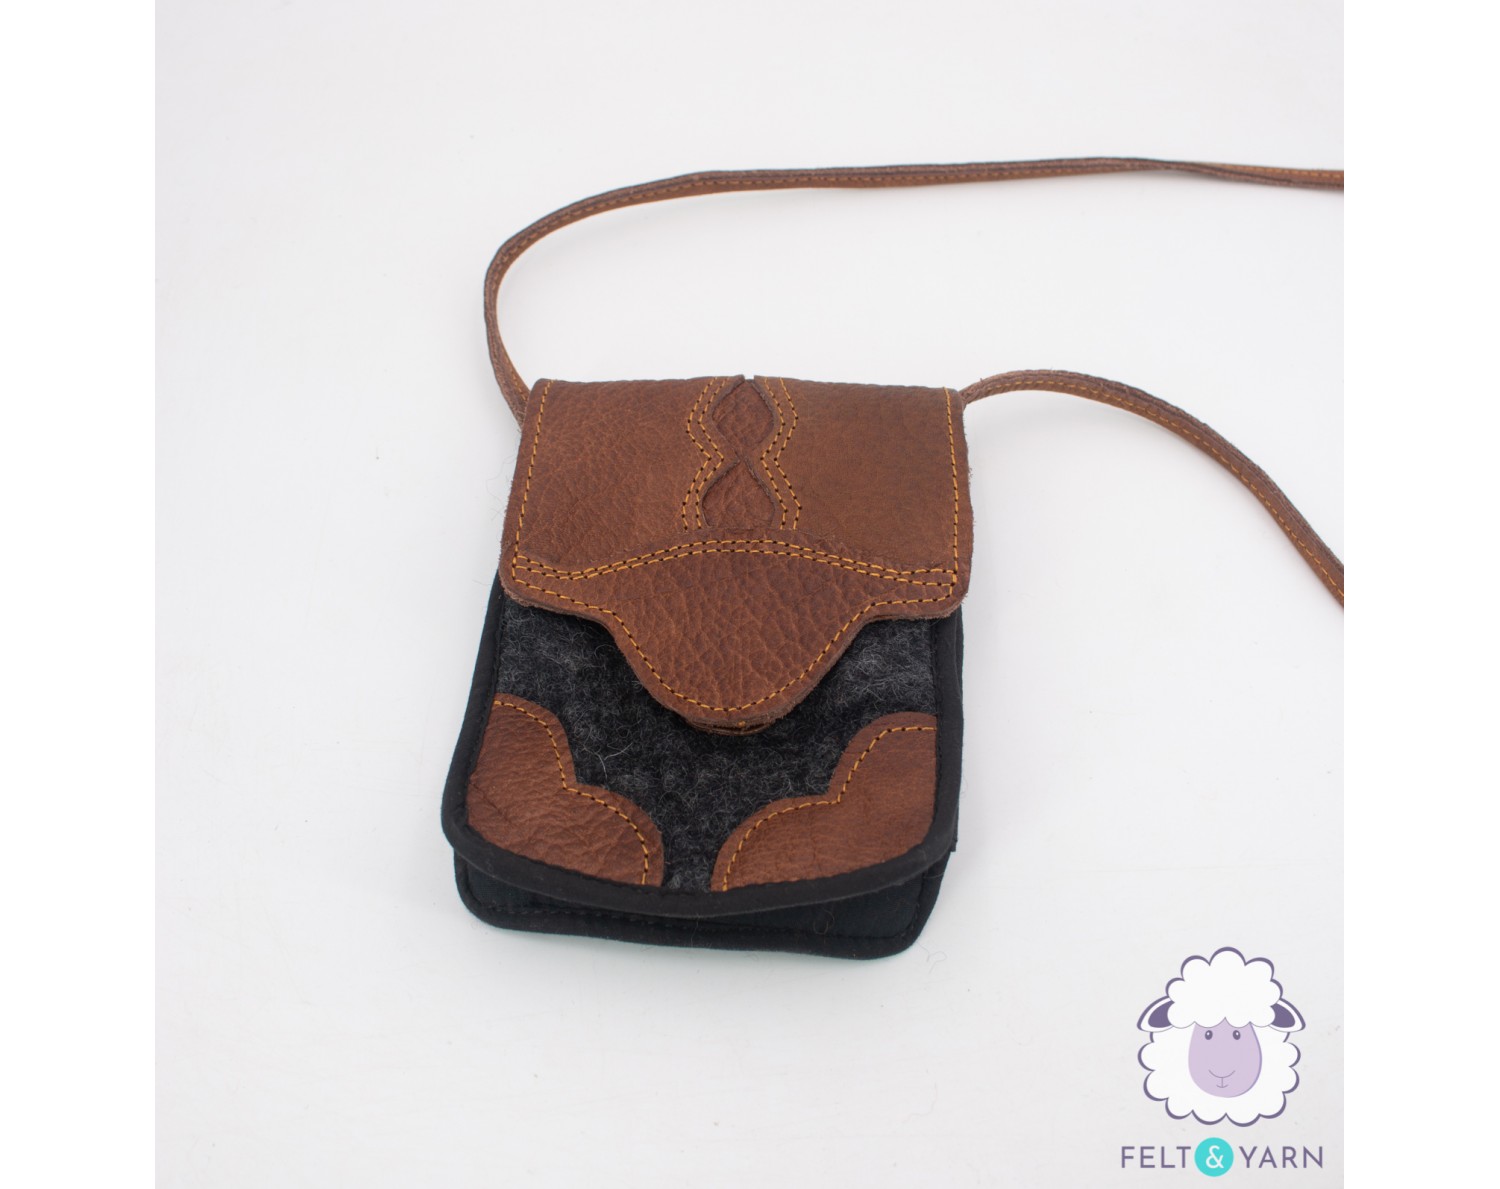 Leather Cross-Body Cell Phone Handbags, Hand made in the USA